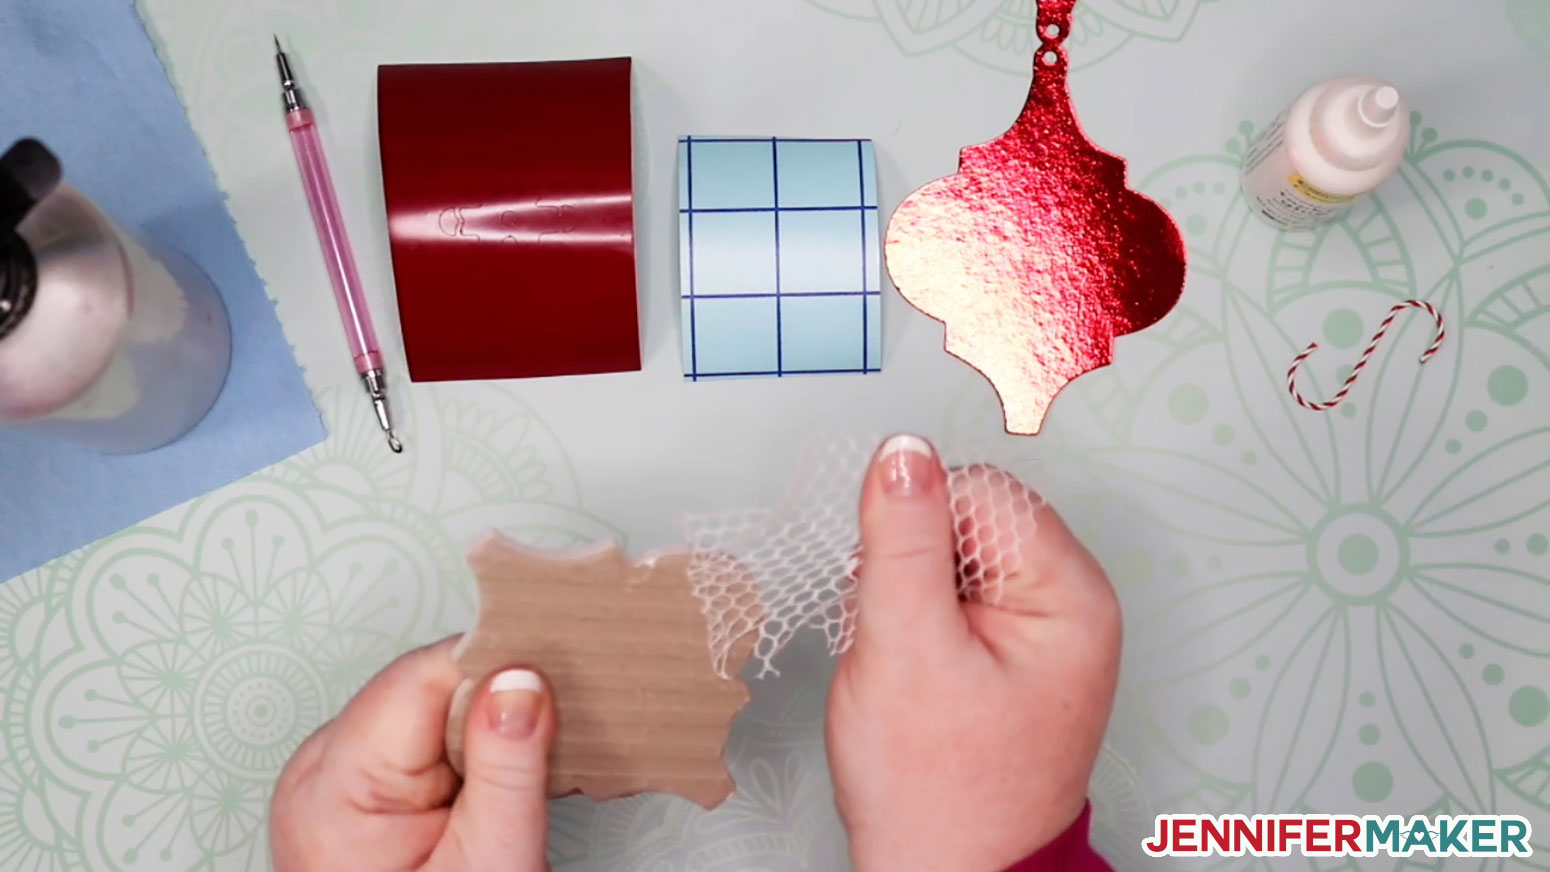 Removing the webbed backing from a ceramic tile ornament